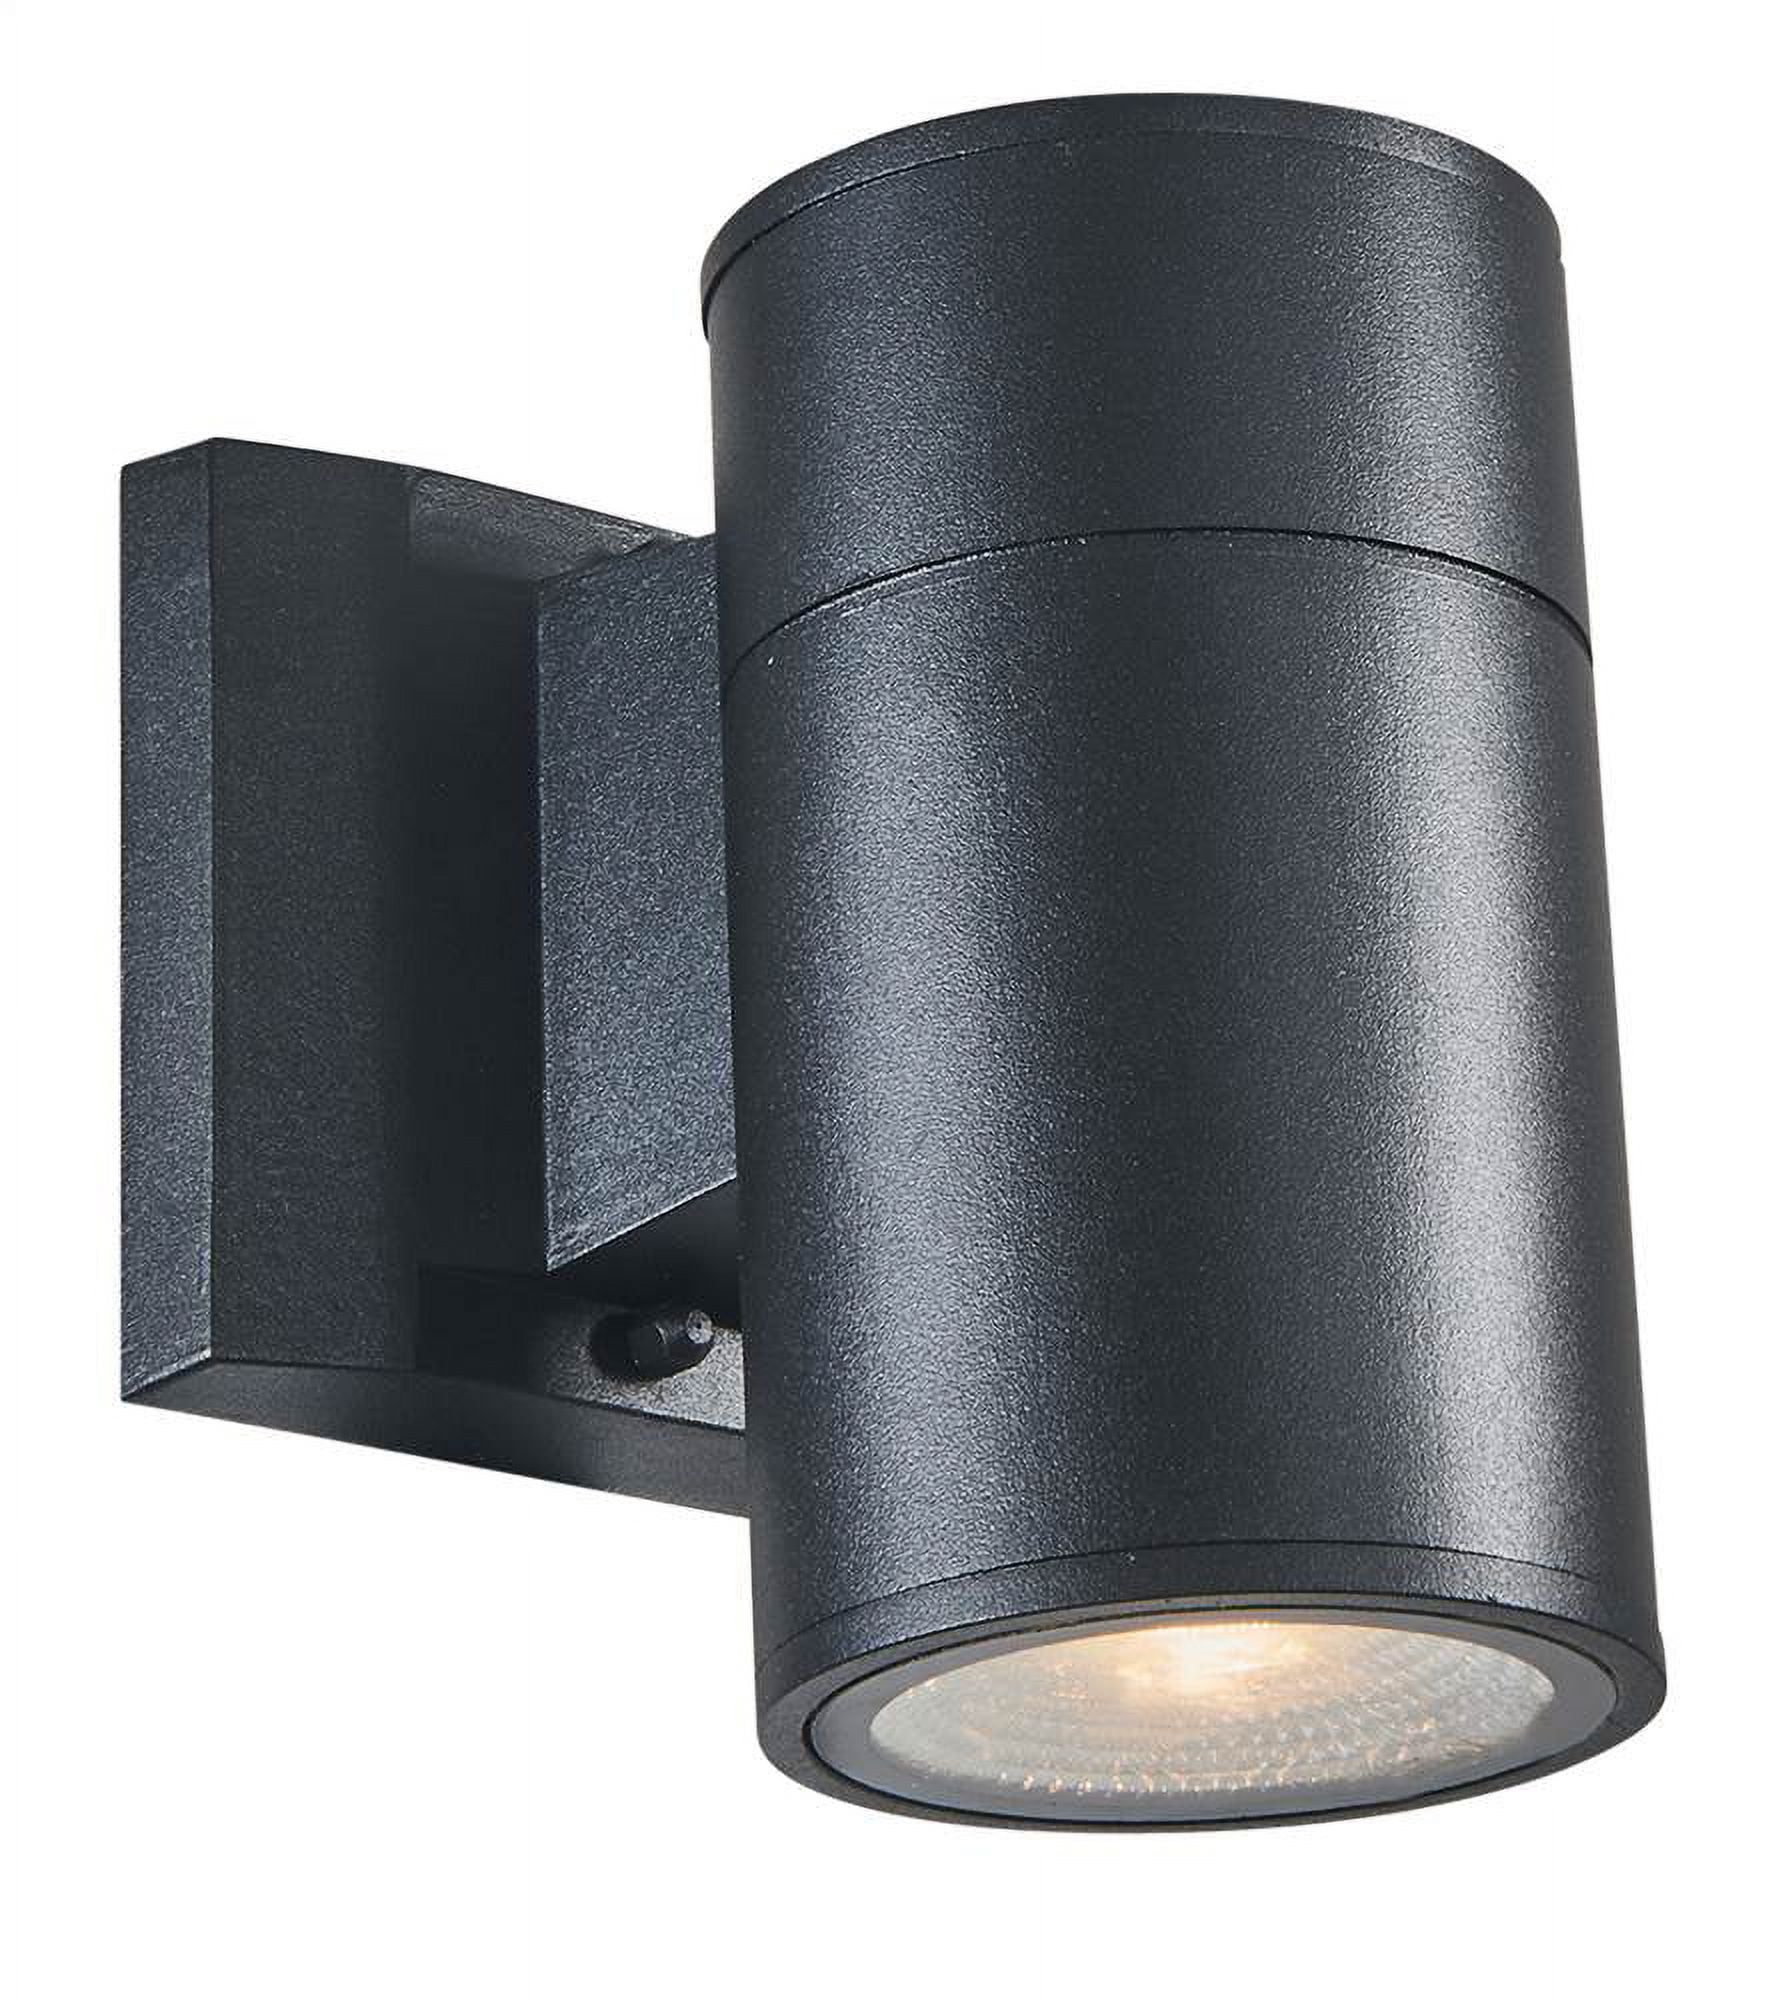 Ch2s084bk06-odl Simon Transitional Led Textured Black Outdoor & Indoor Wall Sconce - 6 In.